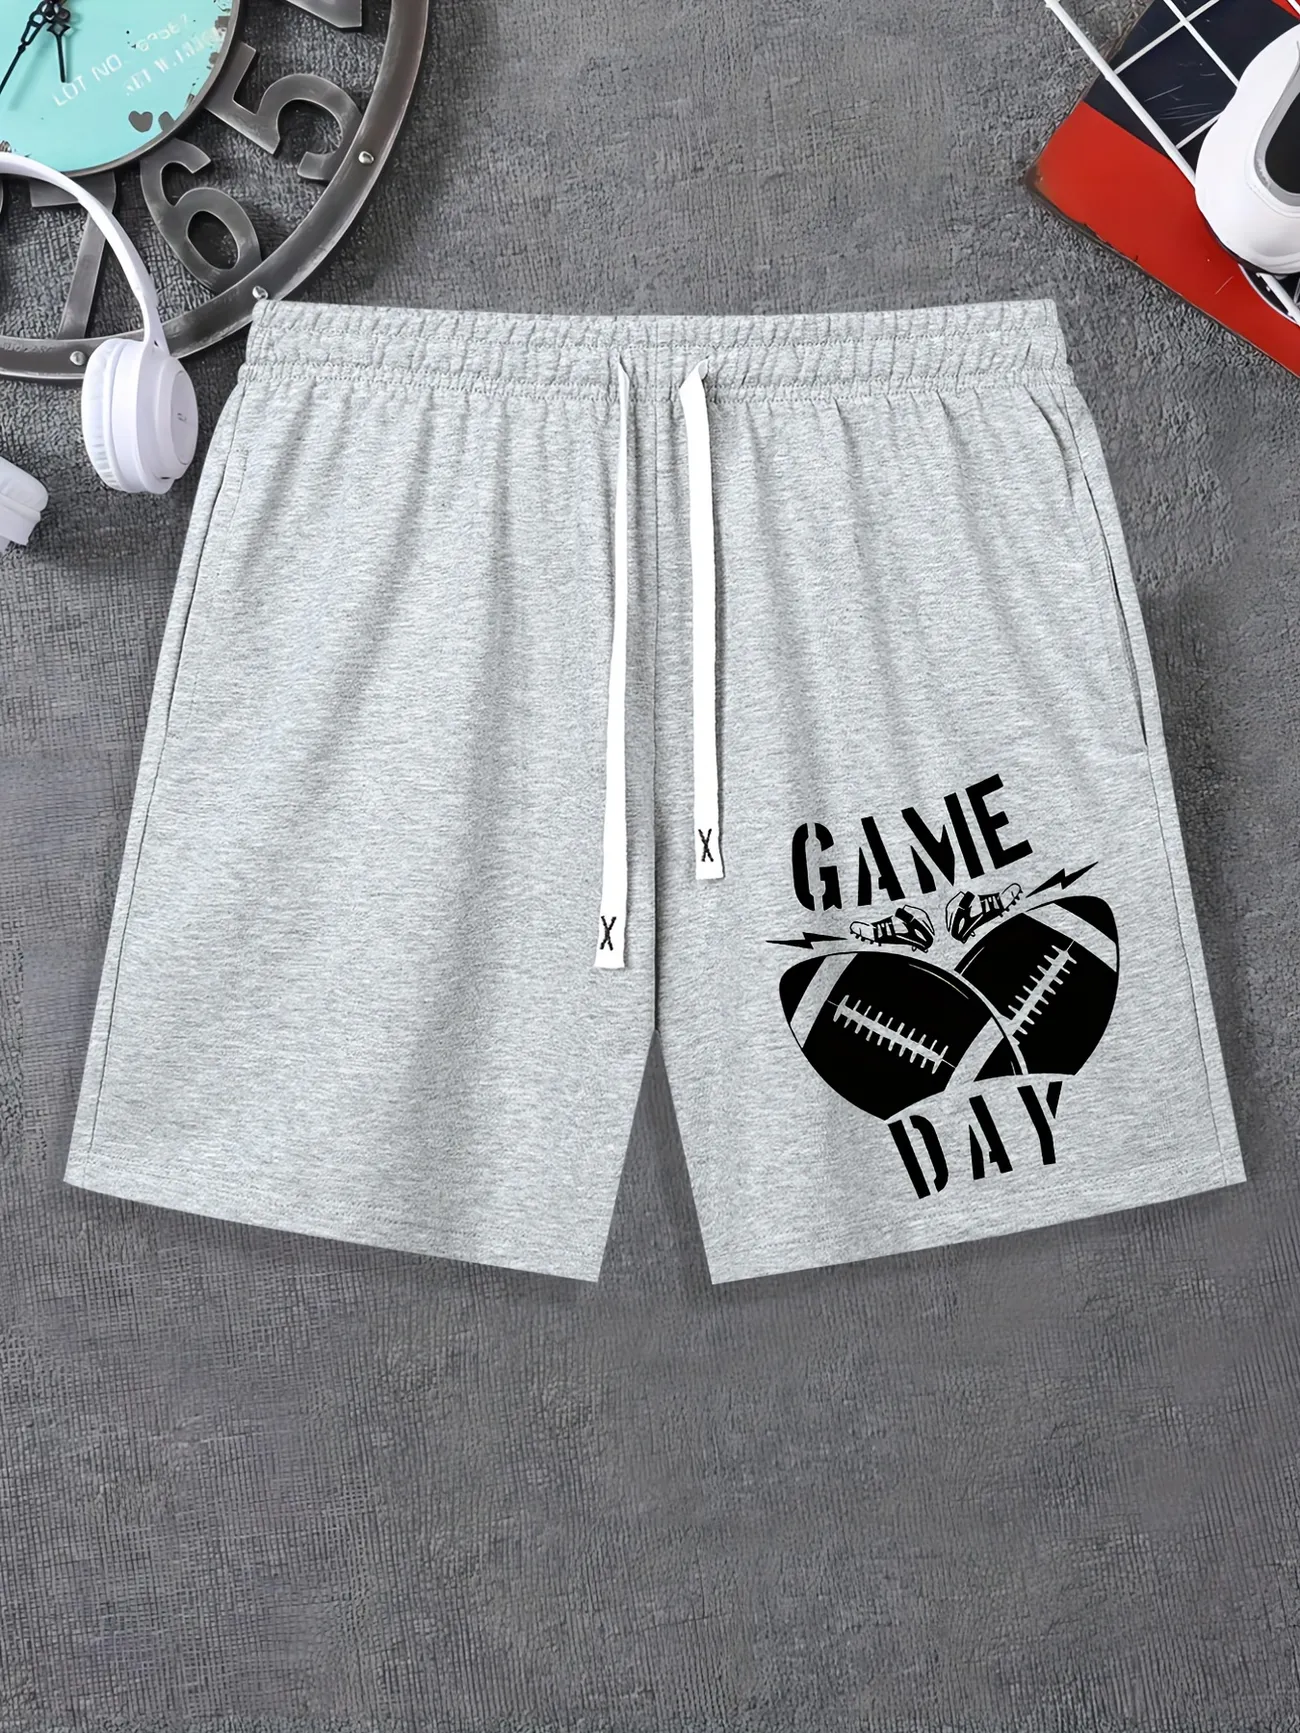 rugby shorts online